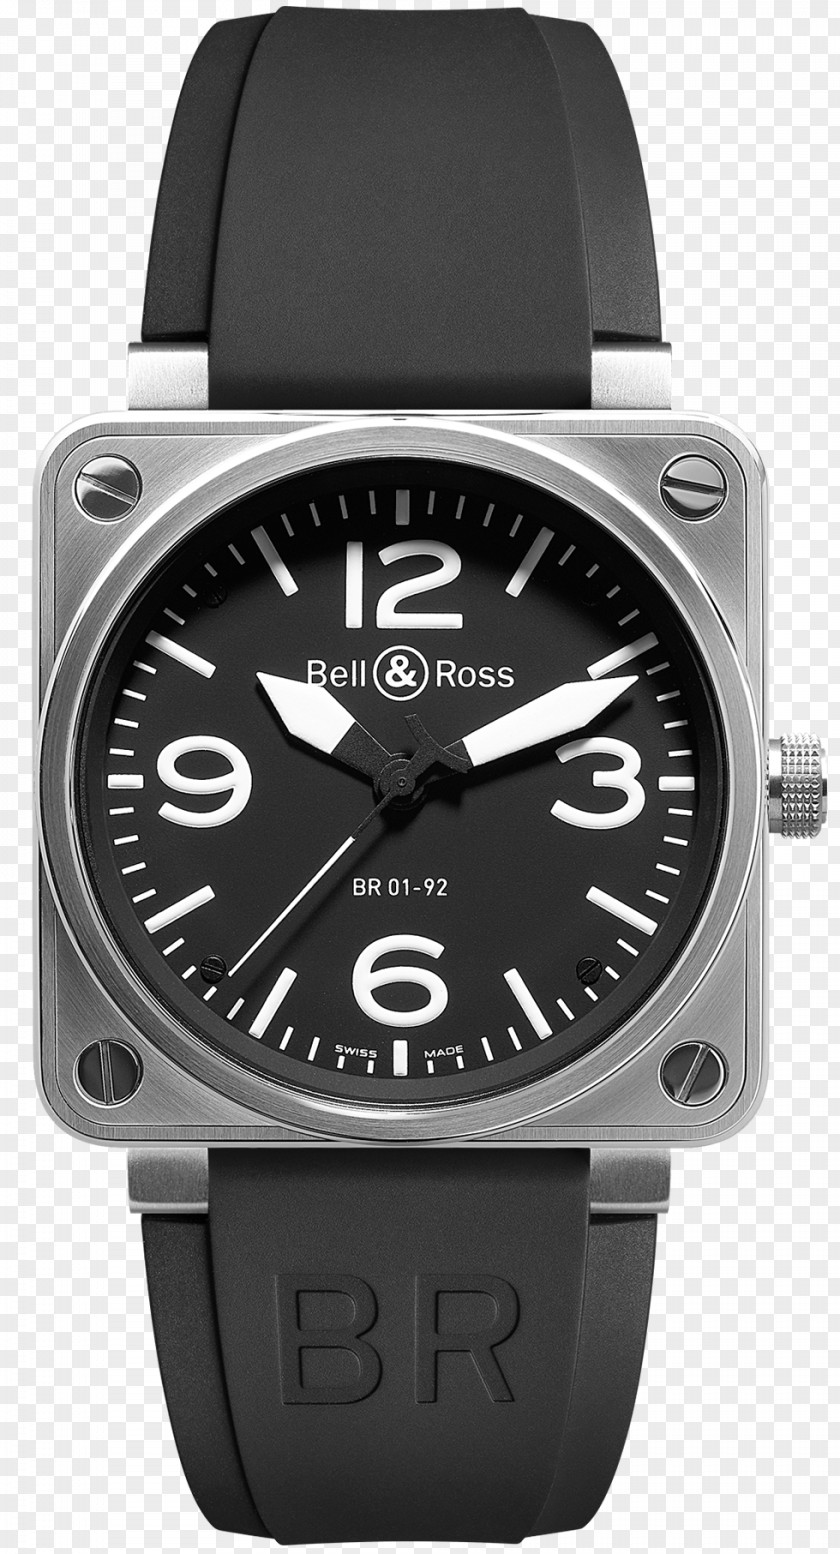 Metalcoated Crystal Bell & Ross, Inc. Automatic Watch Diamond PNG